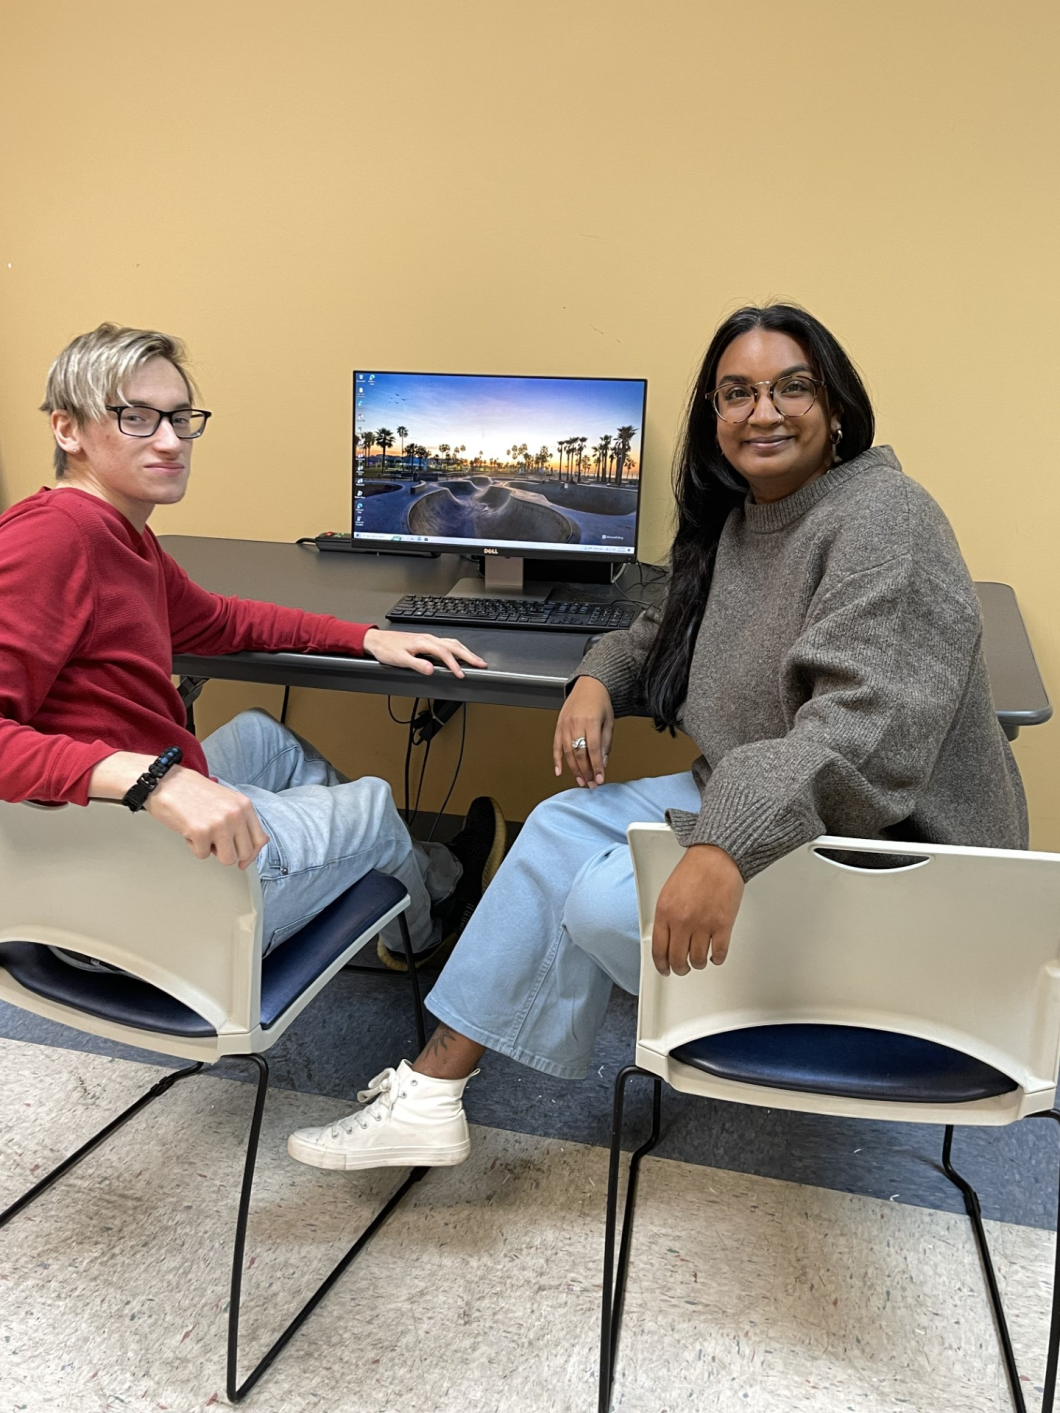 Two people sit on chairs at a desk with a computer, they are turning around to look at the camera for the picture